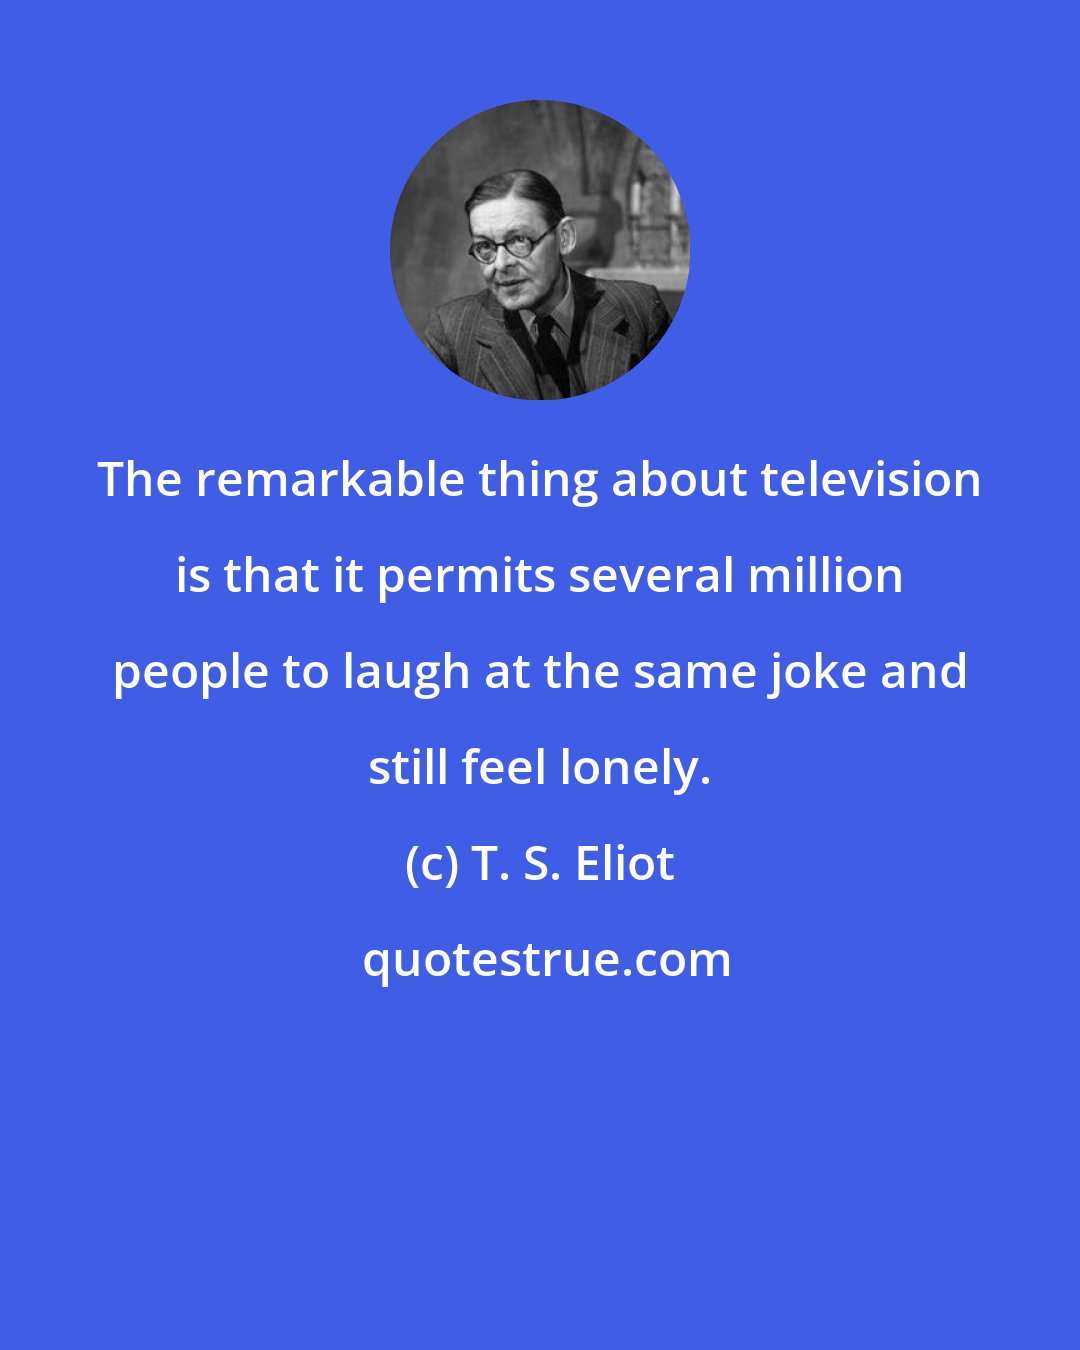 T. S. Eliot: The remarkable thing about television is that it permits several million people to laugh at the same joke and still feel lonely.